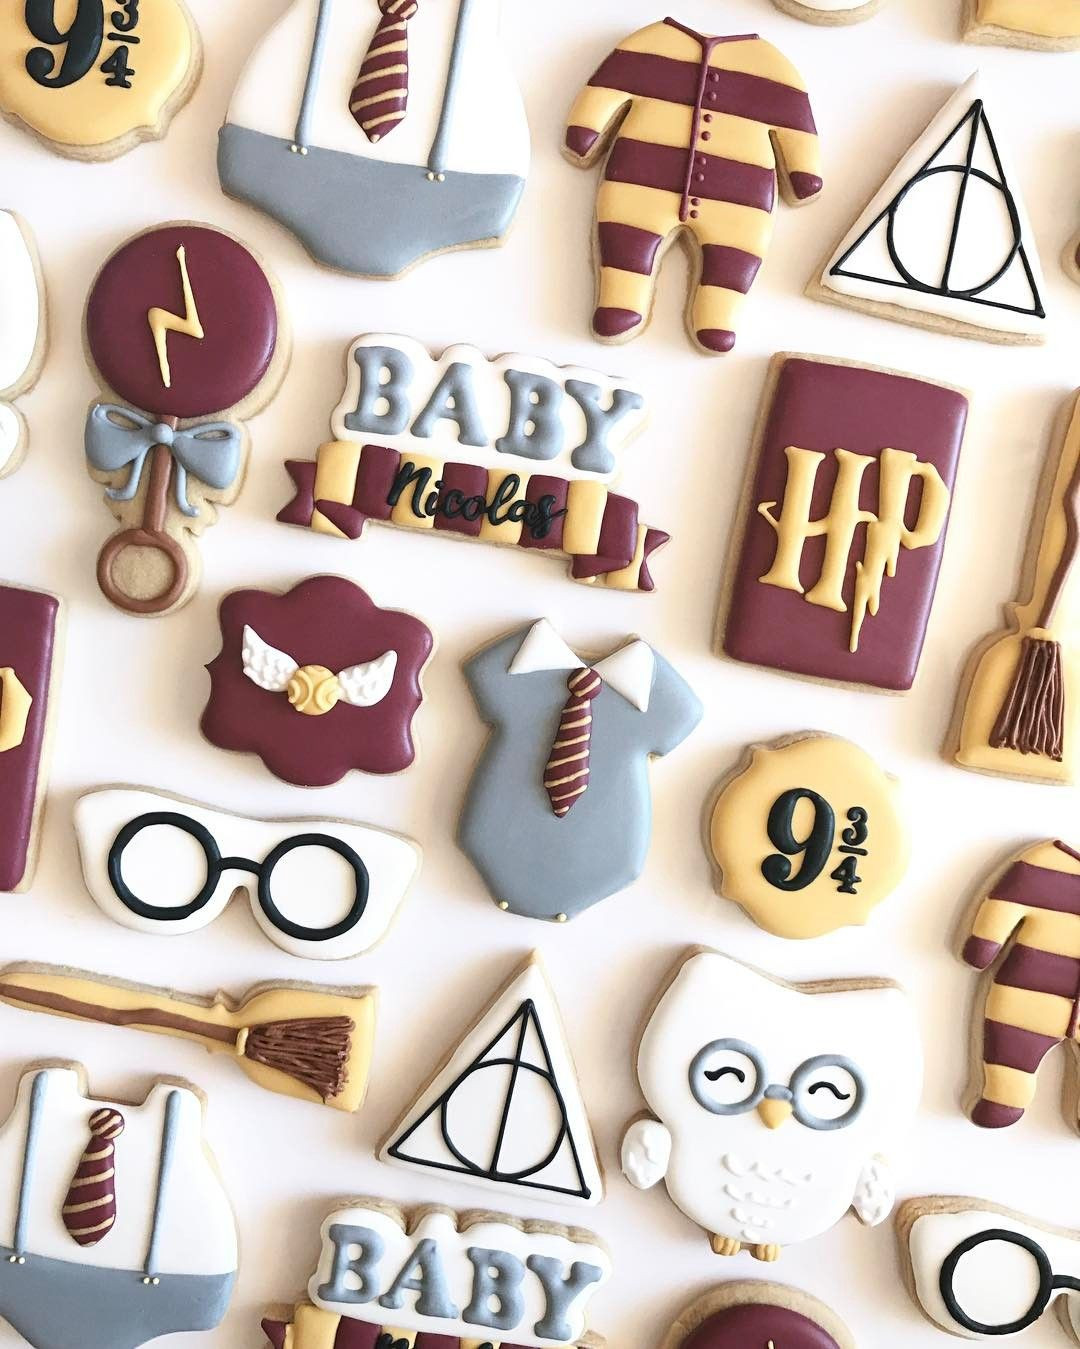 Harry Potter Baby Gift Ideas
 THE BIRTH SQUAD New Baby baby shower